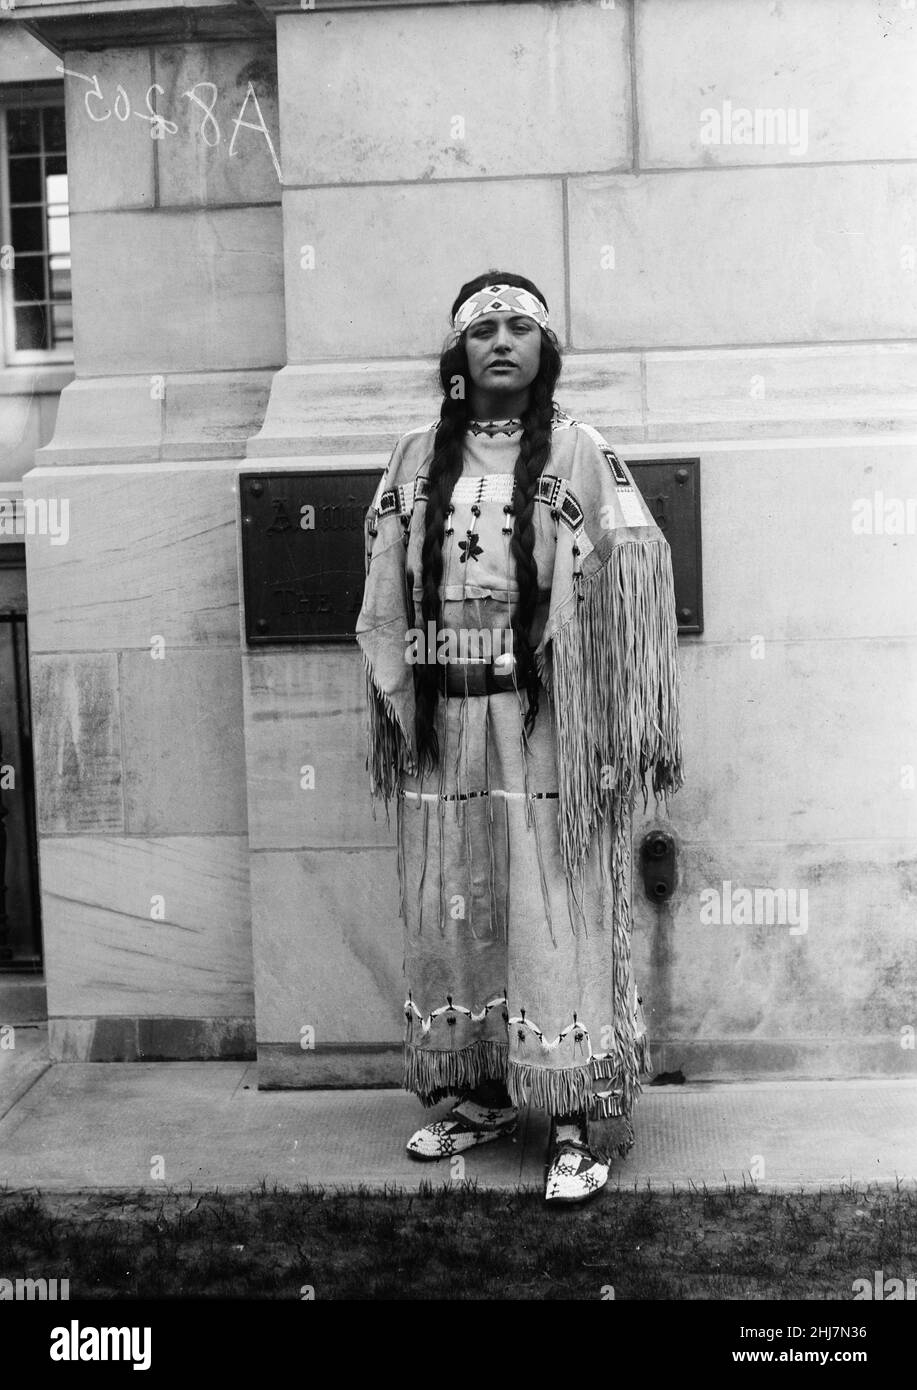 Antique and vintage photo - Native american / Indian / American Indian woman. Harris & Ewing, photographer. 1924. Stock Photo